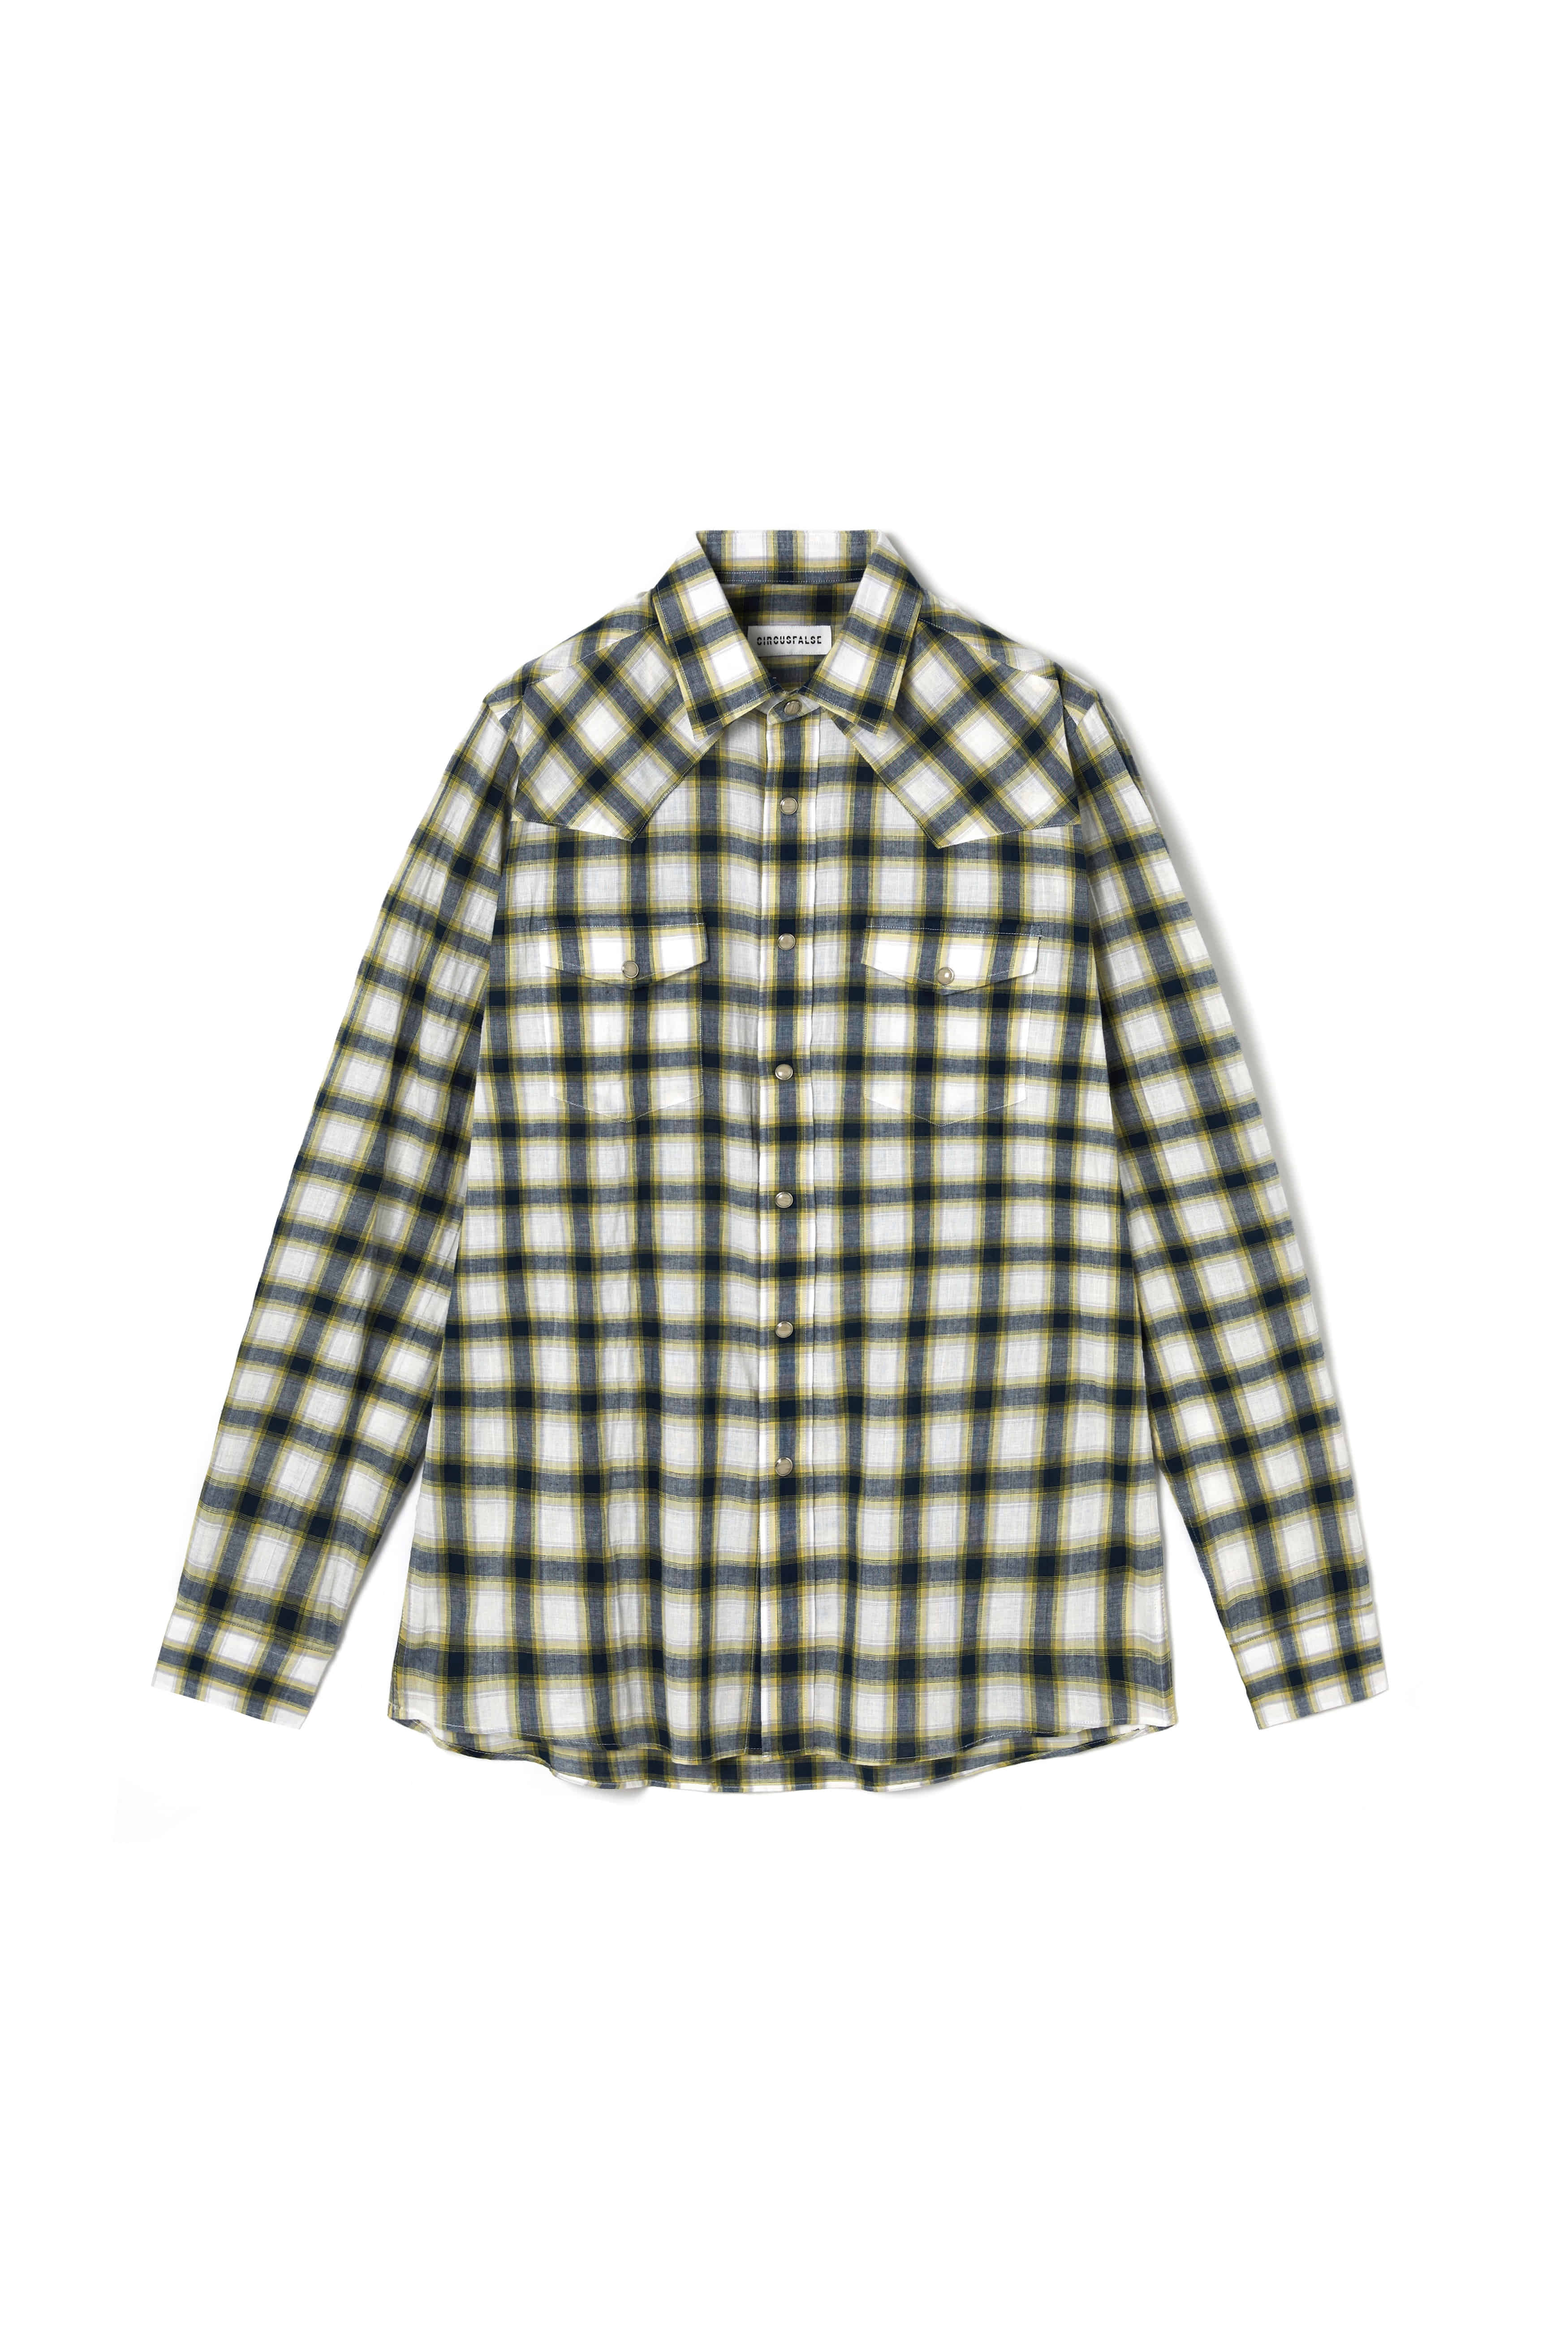 WESTERN SHIRTS IN YELLOW MULTI CHEKED